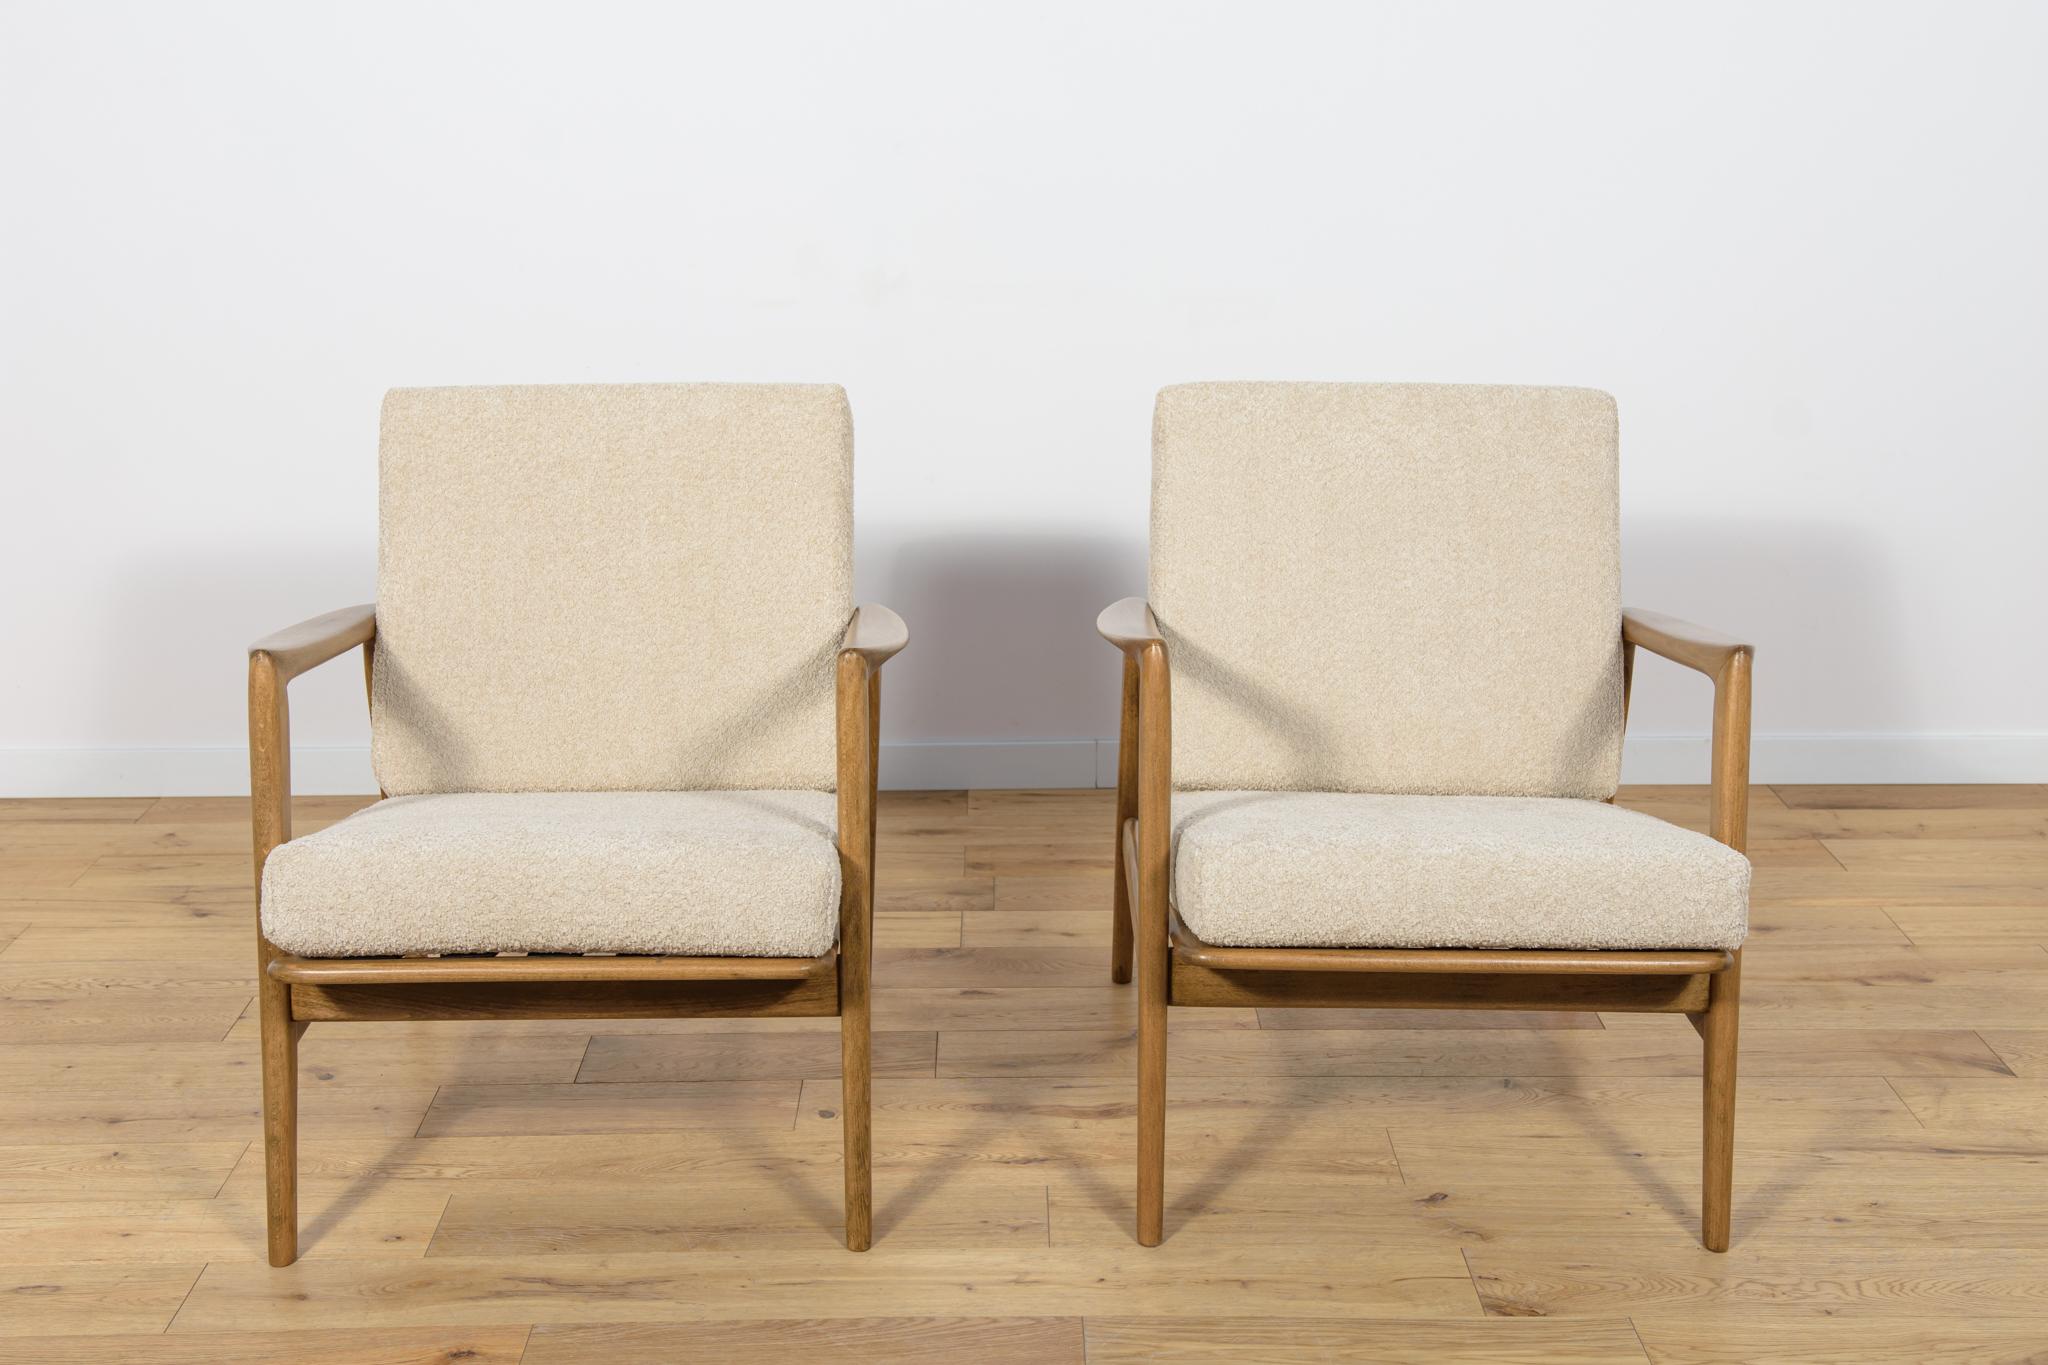 
This pair of armchairs was produced by the Polish company Swarzędzka Furniture Factory in 60s. Comfortable armchairs with a unique form. Cushions replaced with new ones, upholstered in high-quality boucle typ fabric in a cream color. The beech